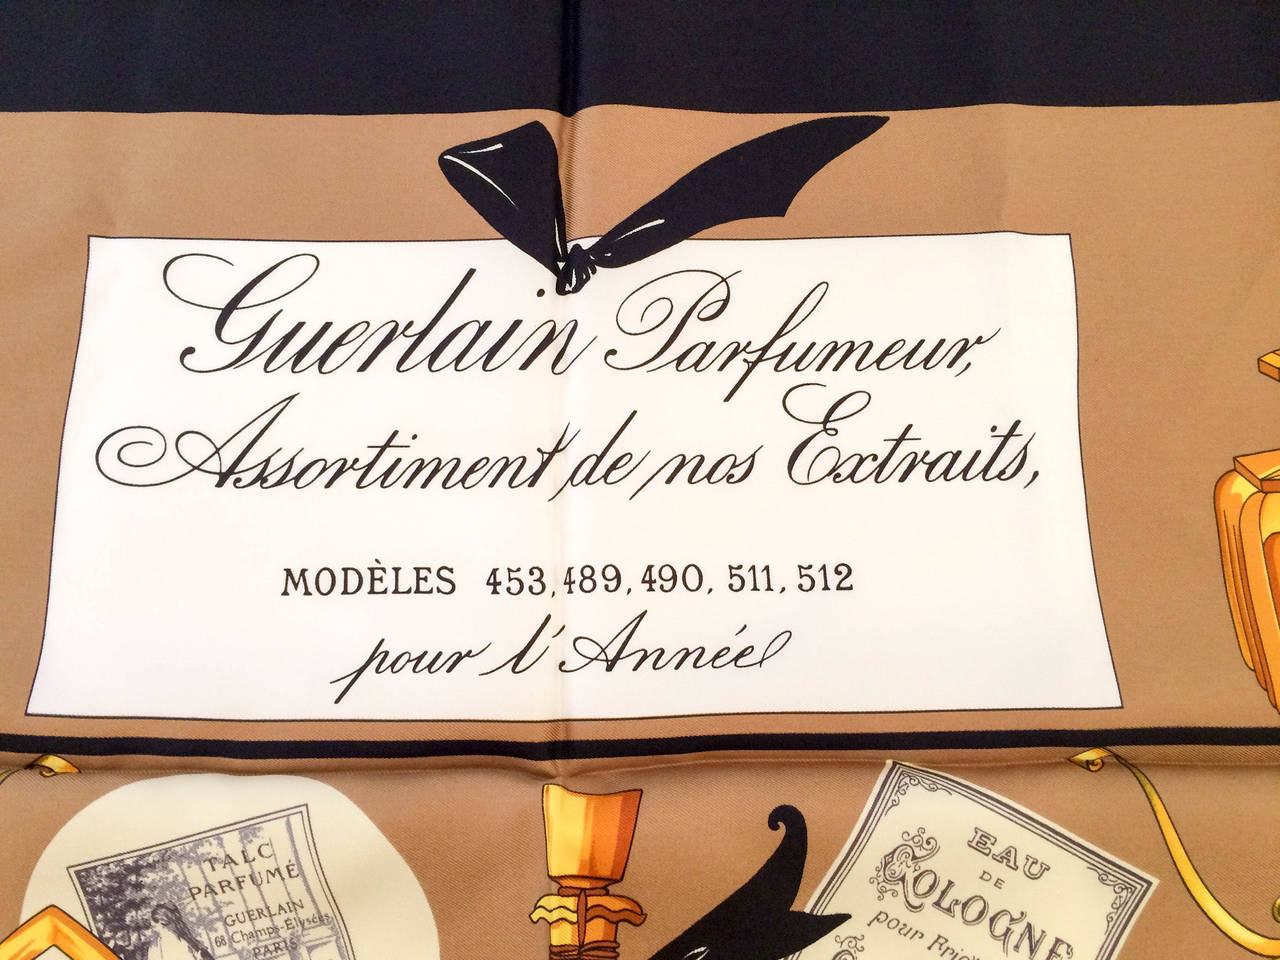 Guerlain Parfumeur, Assortiment de nos Extraits, Modeles 453, 489, 490, 511, 512, pour l’Anneel - beautiful silk scarf. This was probably a limited edition from the early 1990s in celebration of their perfumes. Hand-rolled hems. 

Period: